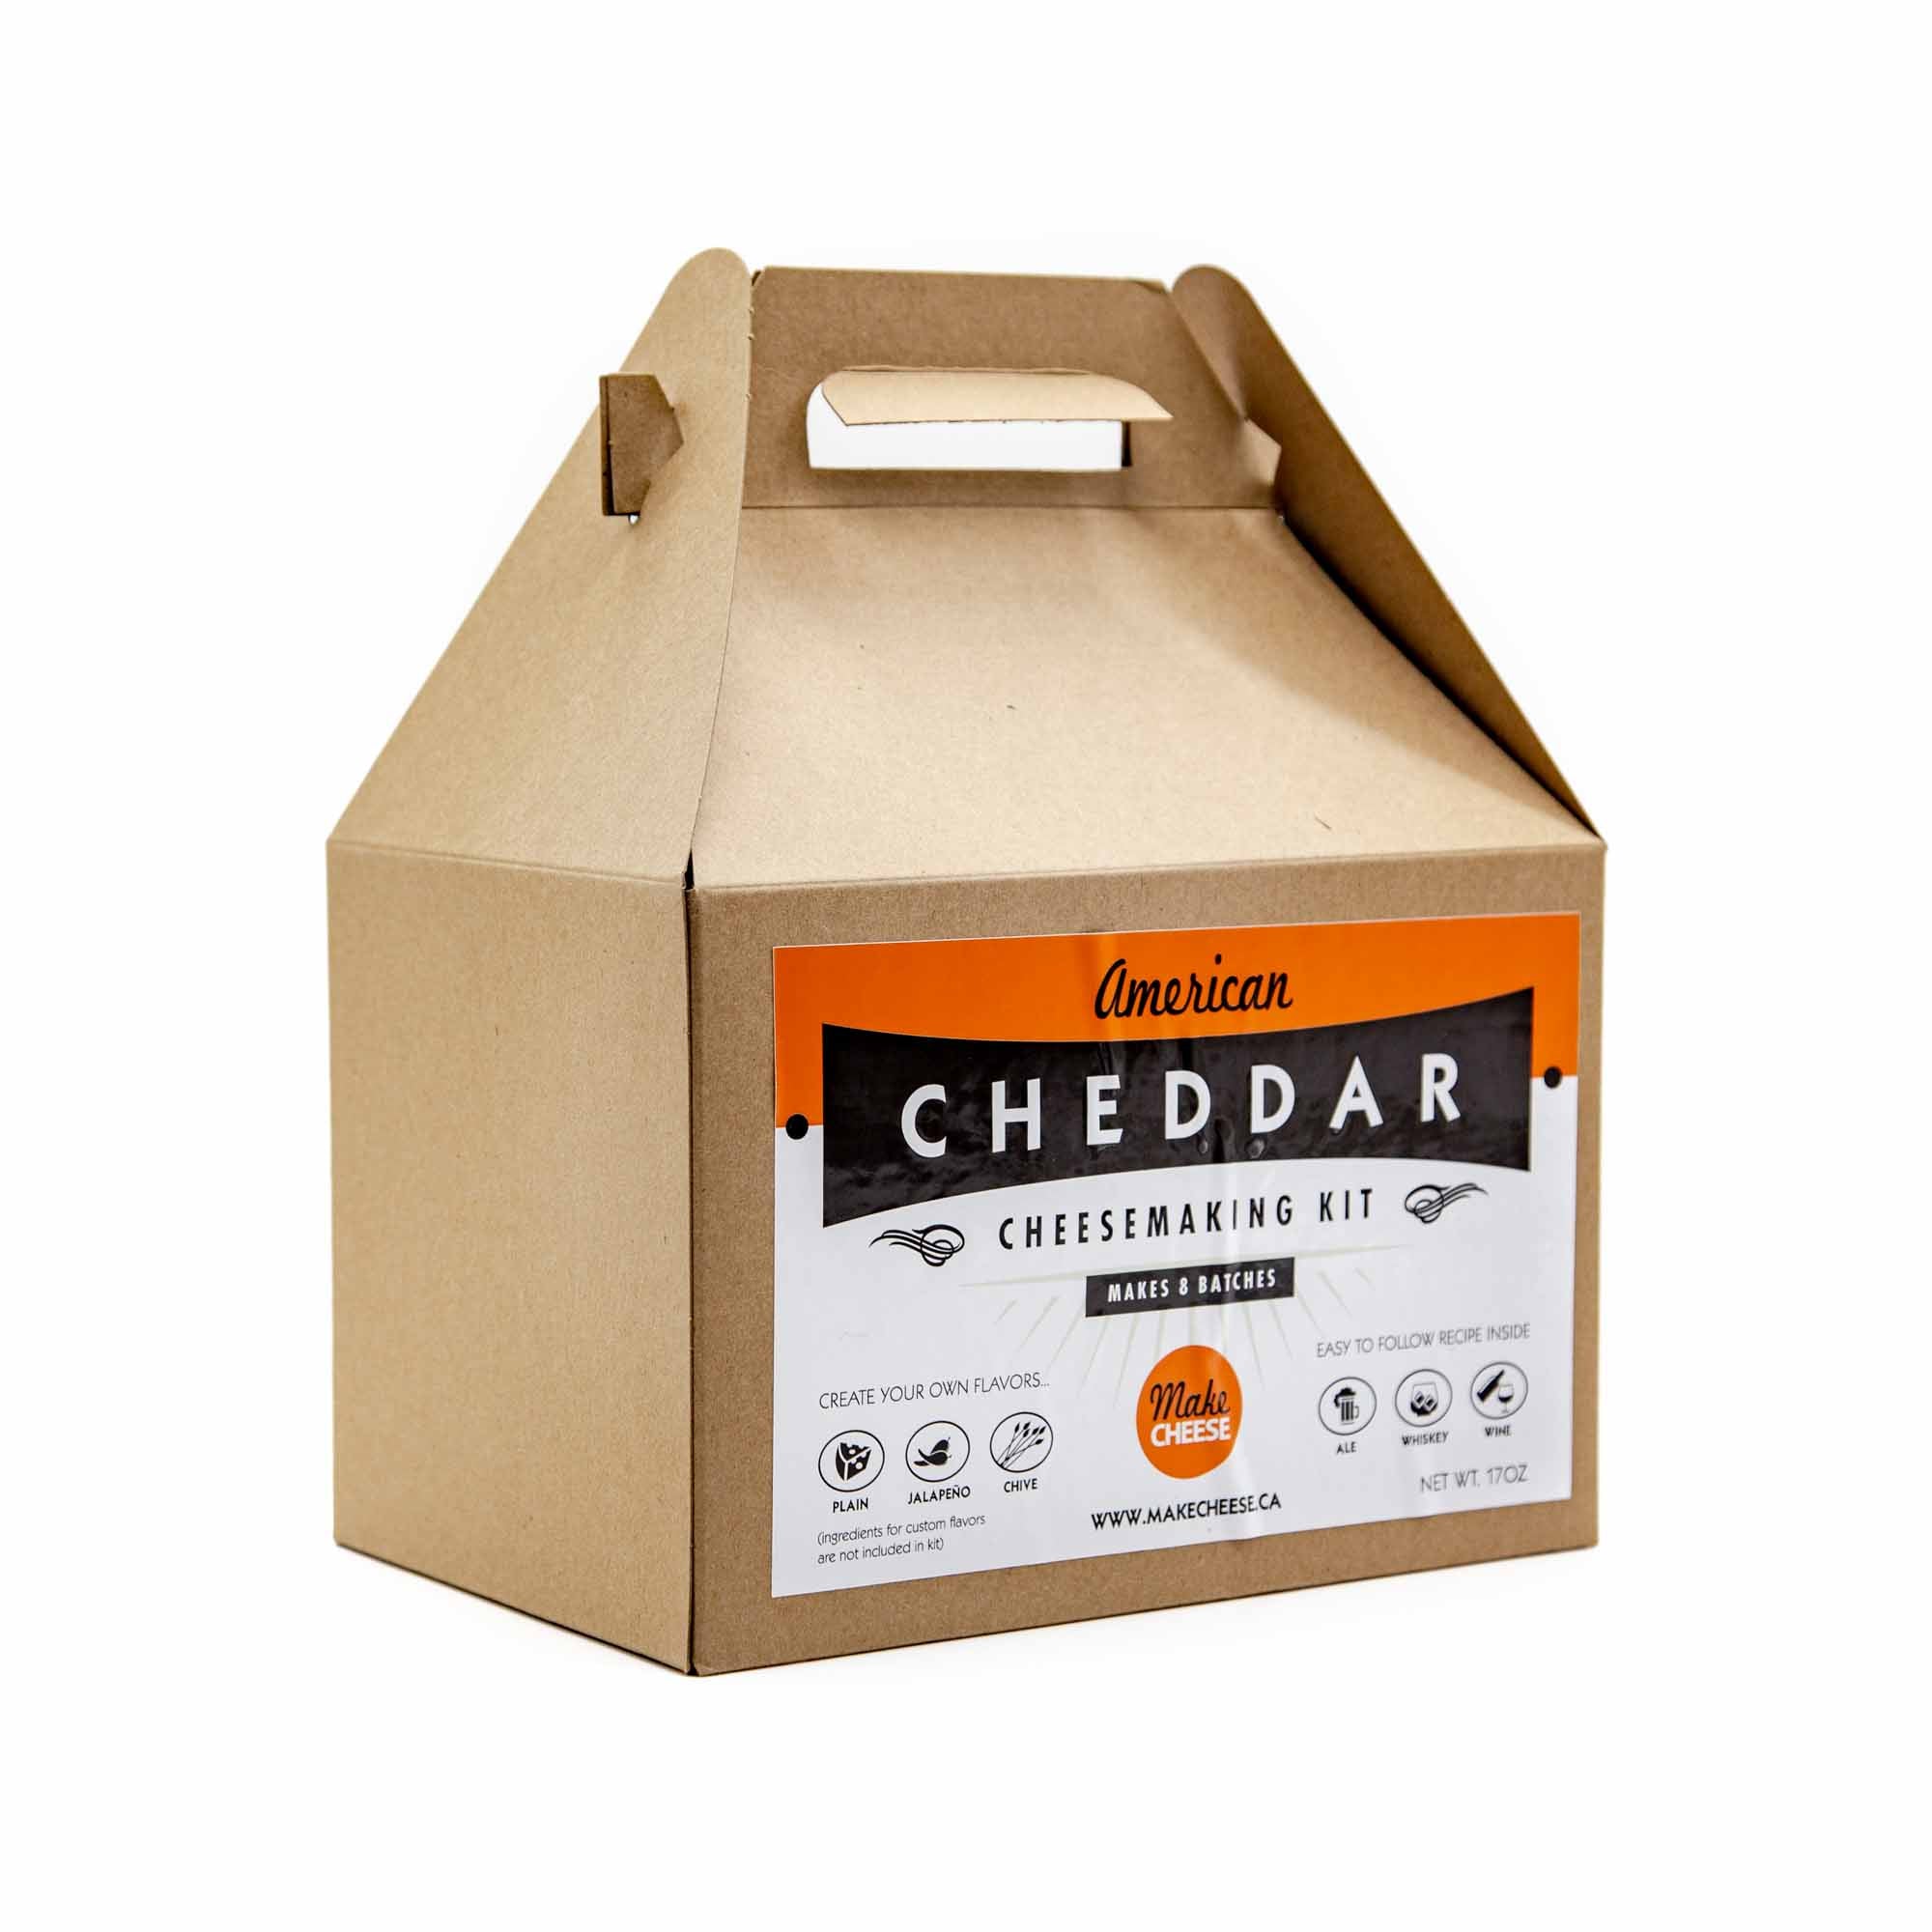 American Cheddar Cheese KIt - Mortise And Tenon